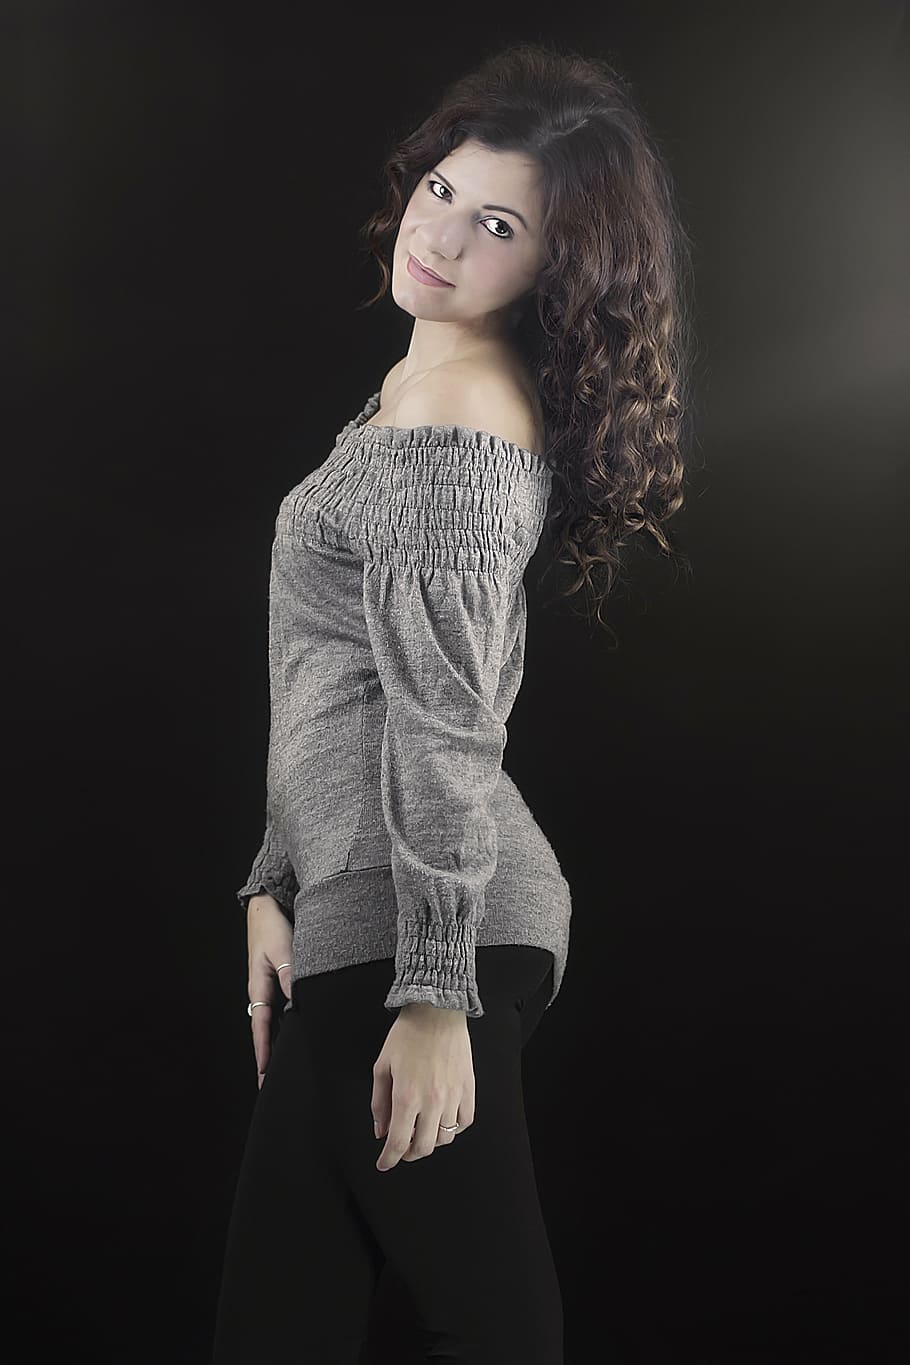 woman wearing gray off-shoulder long-sleeved top, beauty, soma